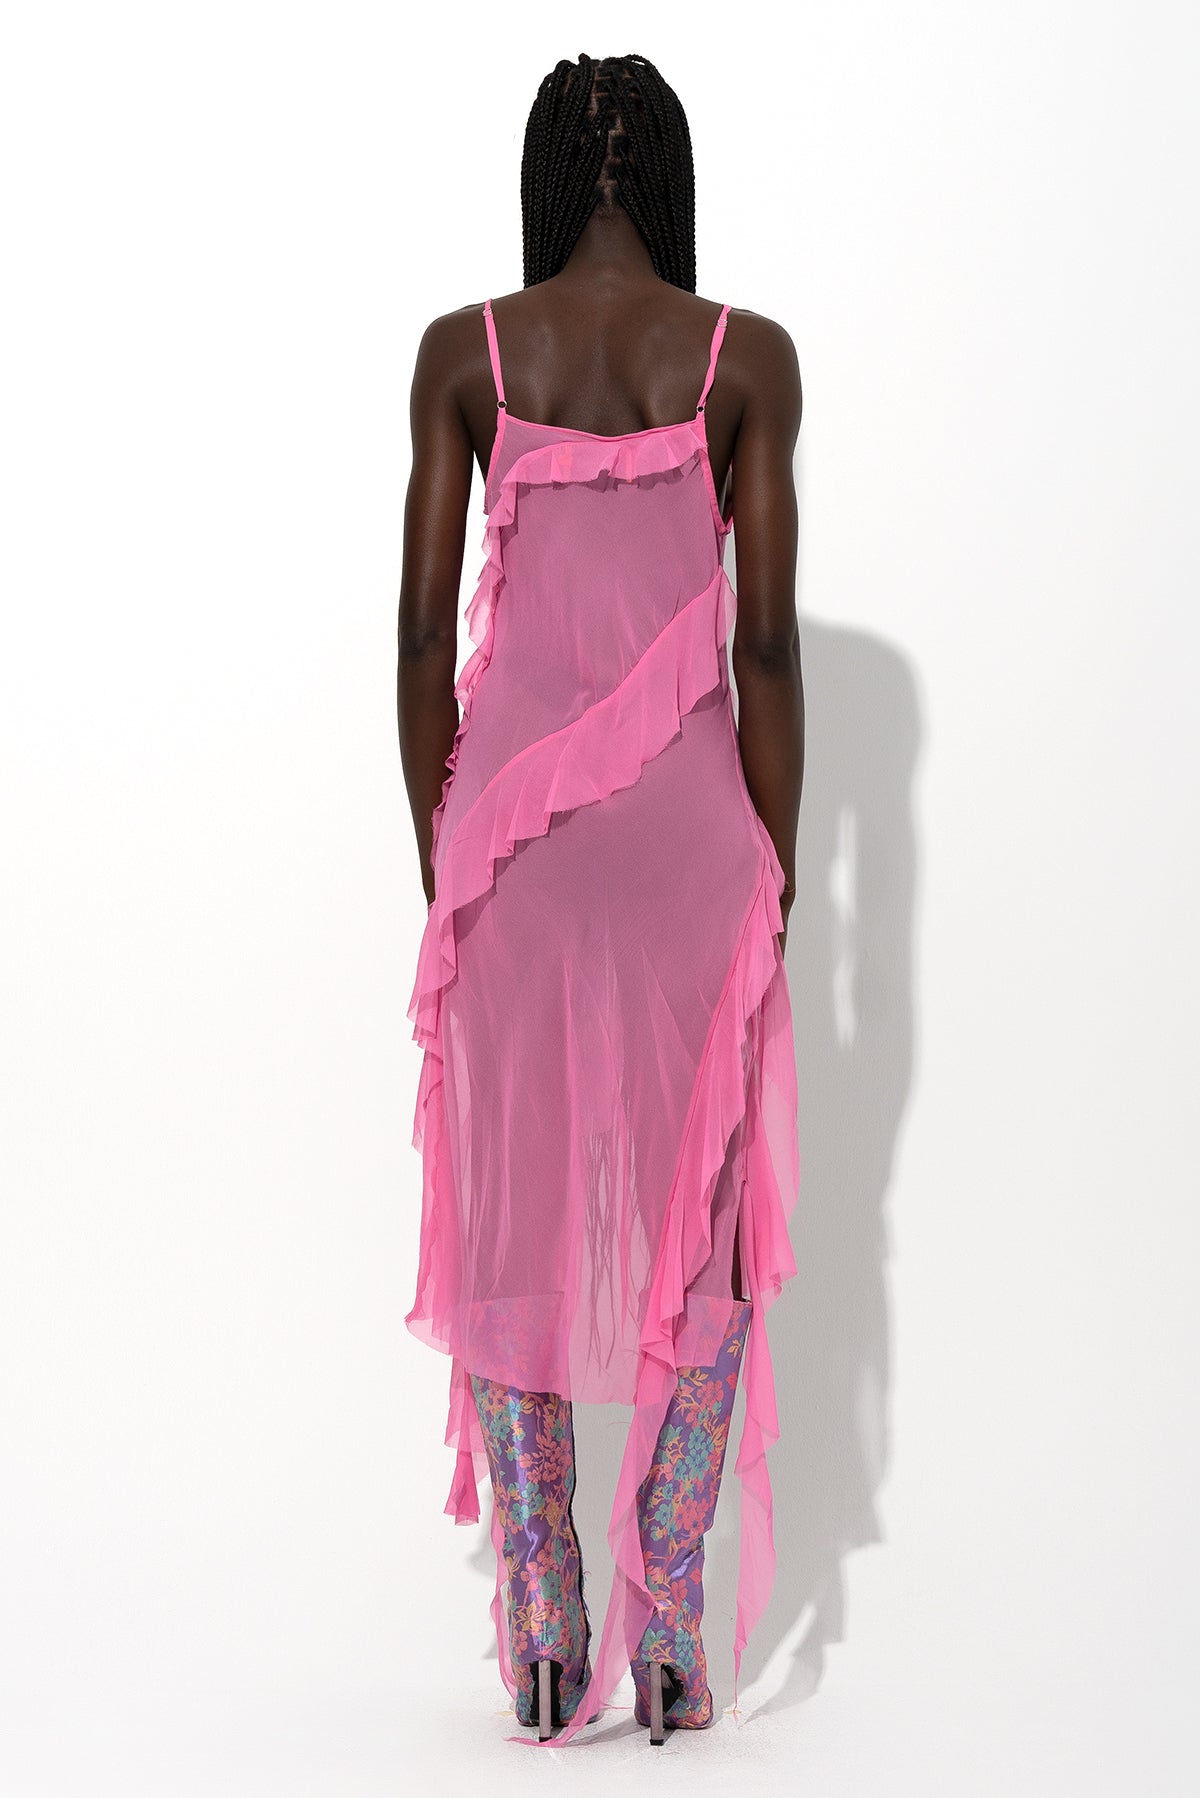 PINK SILK STRAP DRESS WTH FRONT LACE UP marques almeida